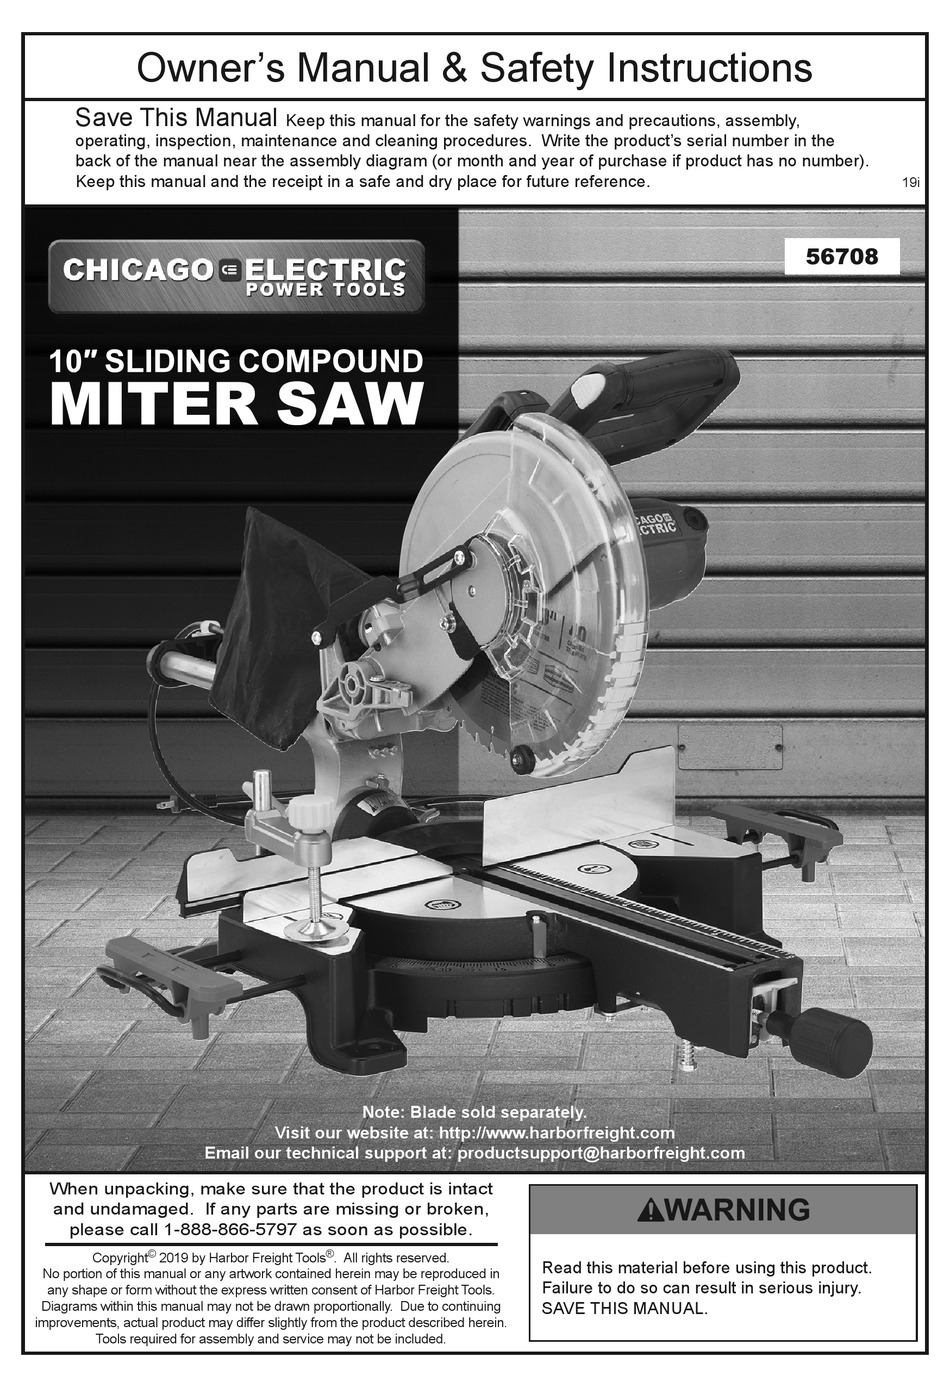 CHICAGO ELECTRIC 56708 OWNER'S MANUAL & SAFETY INSTRUCTIONS Pdf